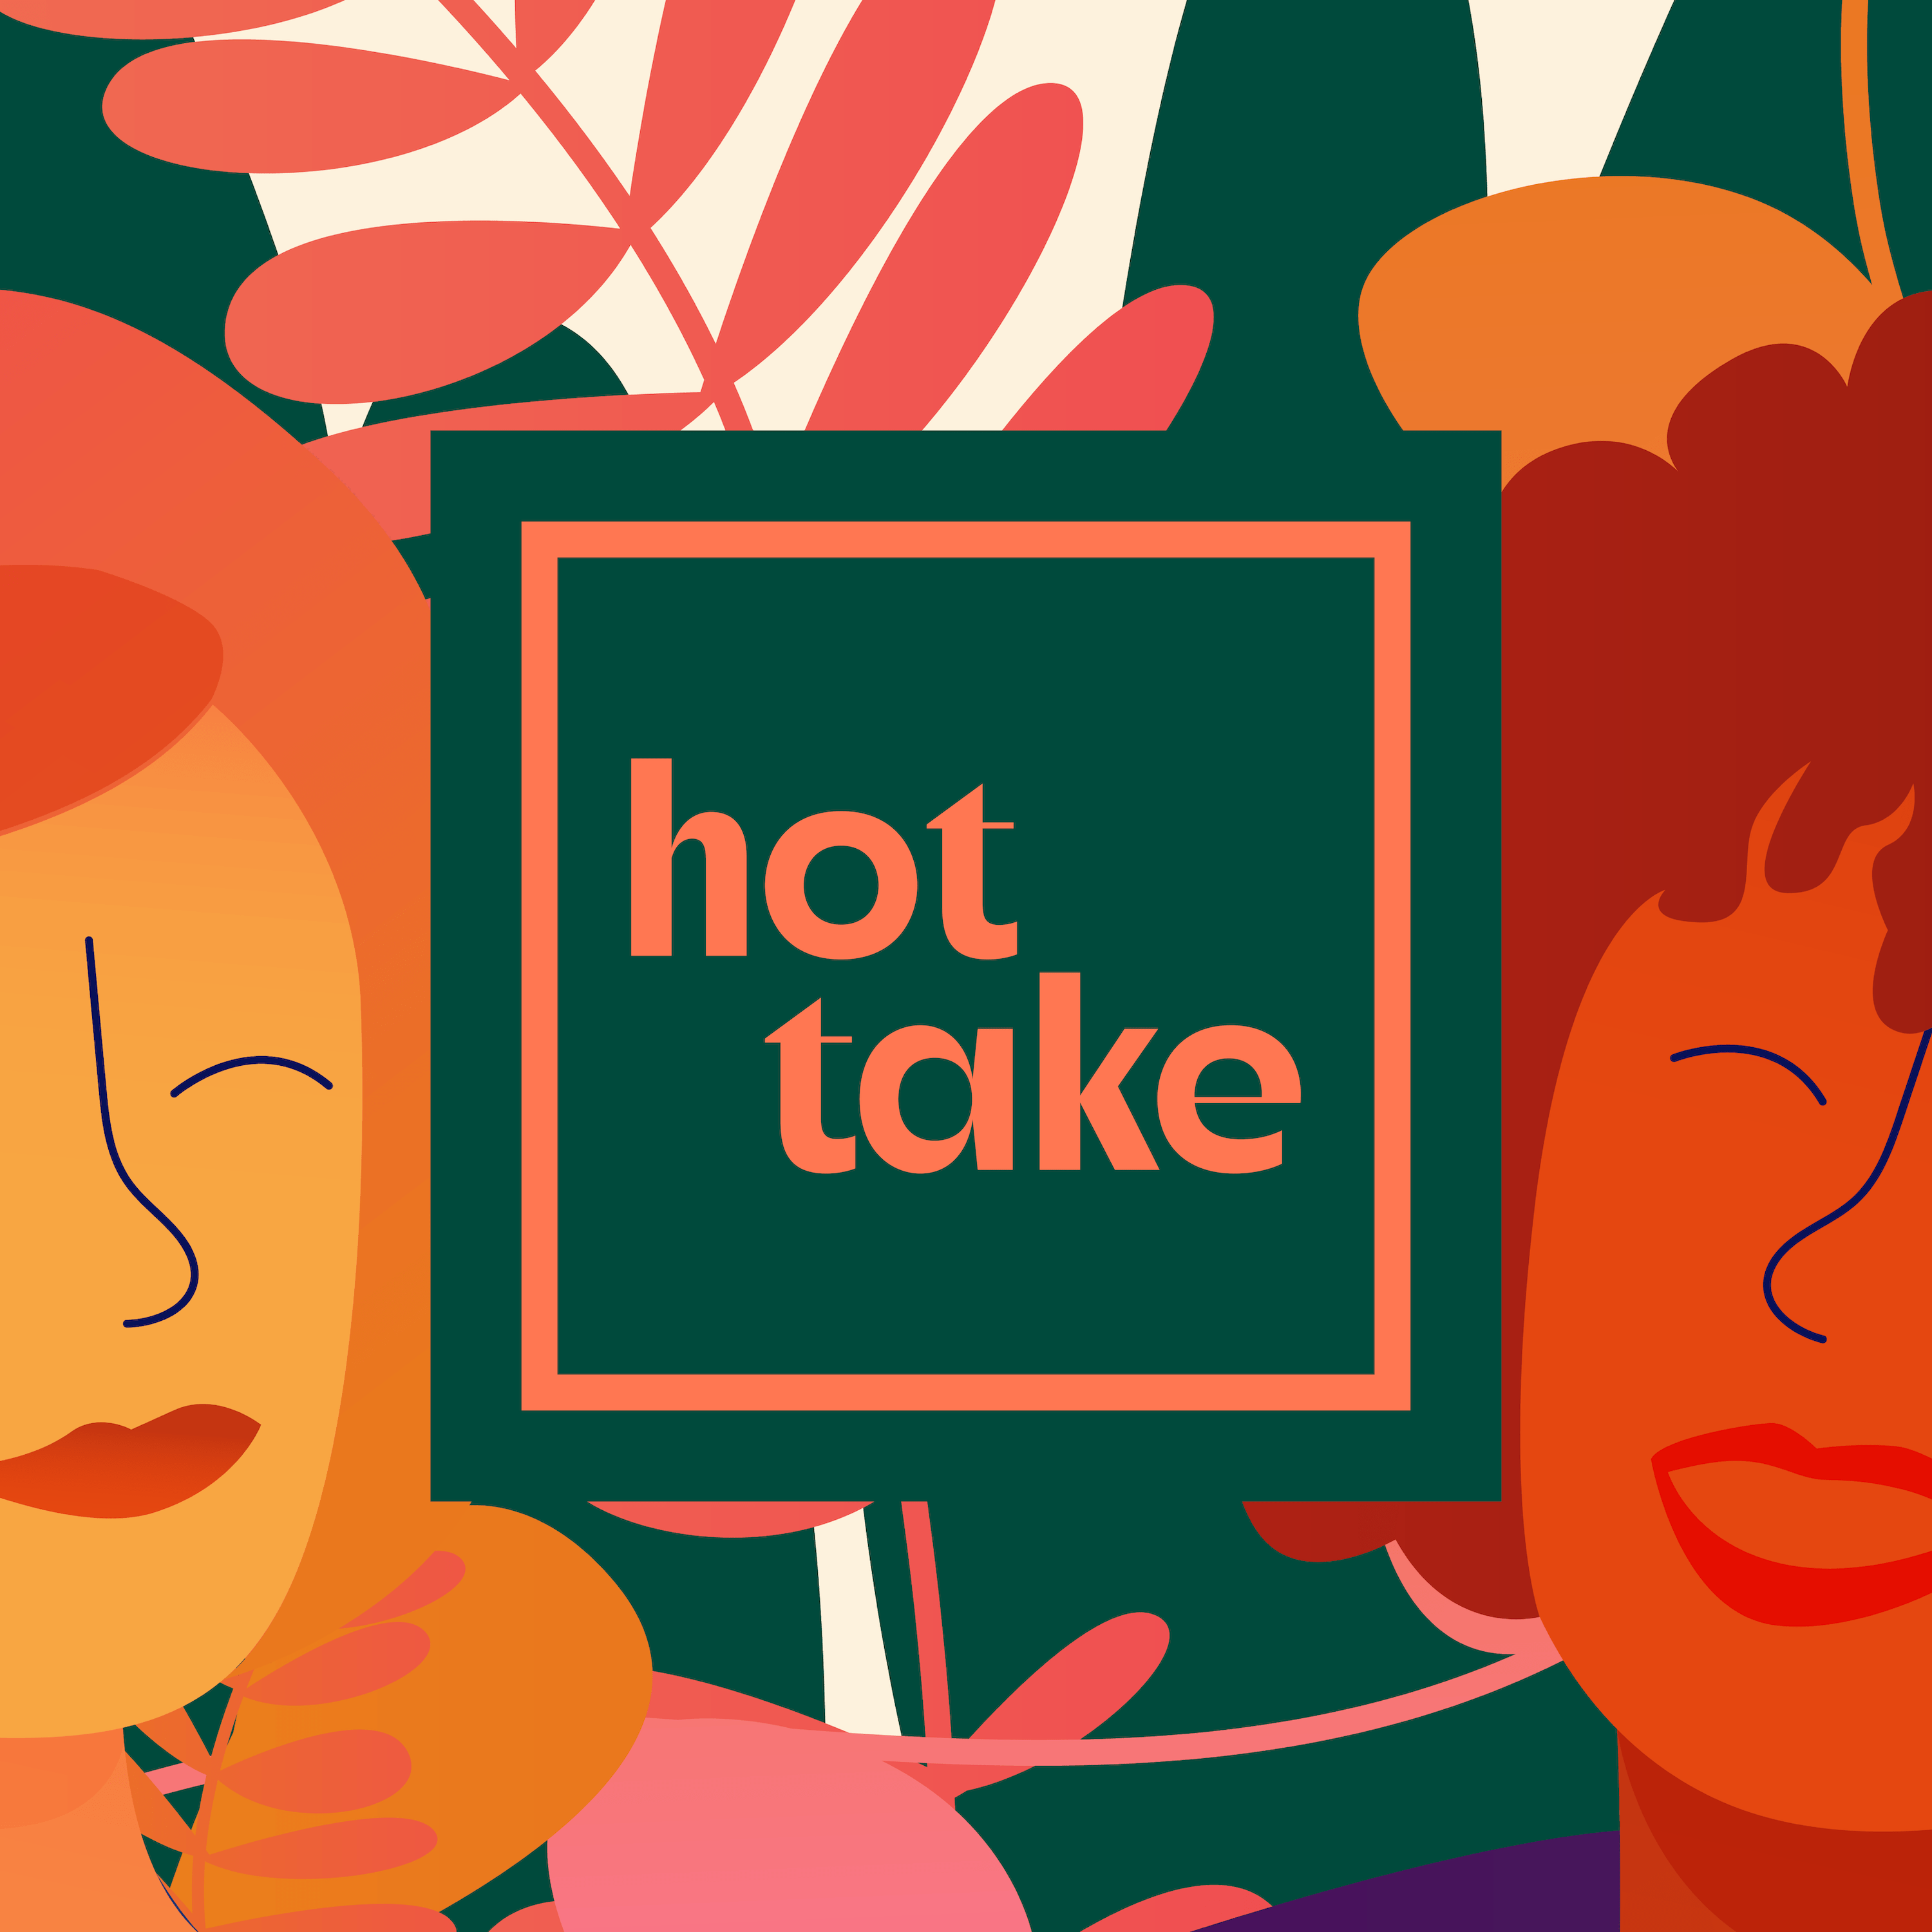 Hot Take is hosted by Amy Westervelt and Mary Heglar. (Image: Hot Take)